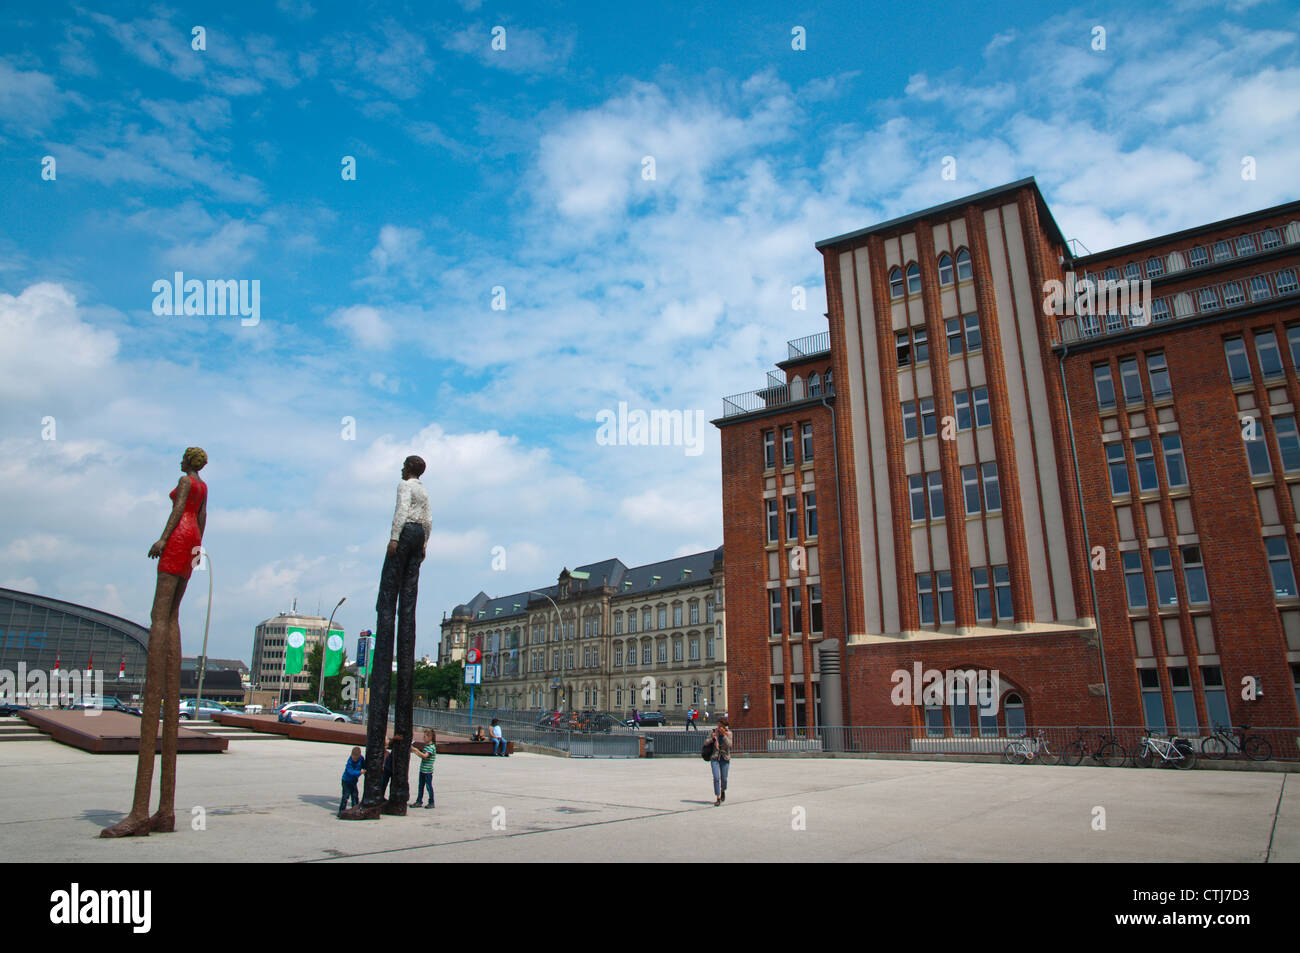 Arno-Schmidt-Platz square with Mann und Frau the Man and woman statue by Stephan Balkenhol central Hamburg Germany Europe Stock Photo